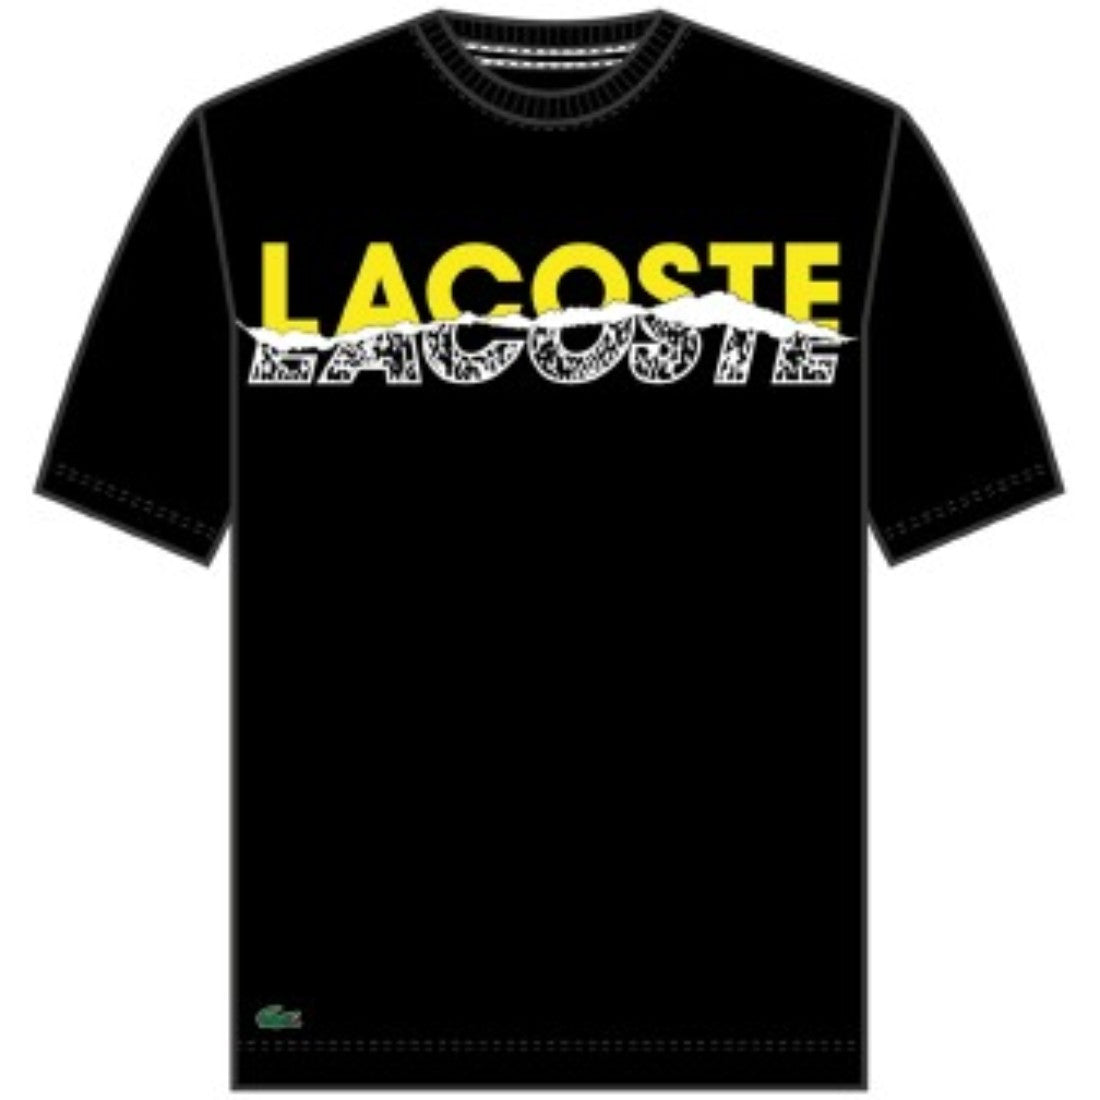 LaCoste-Tear Graphic Tee-Black-TH4907B